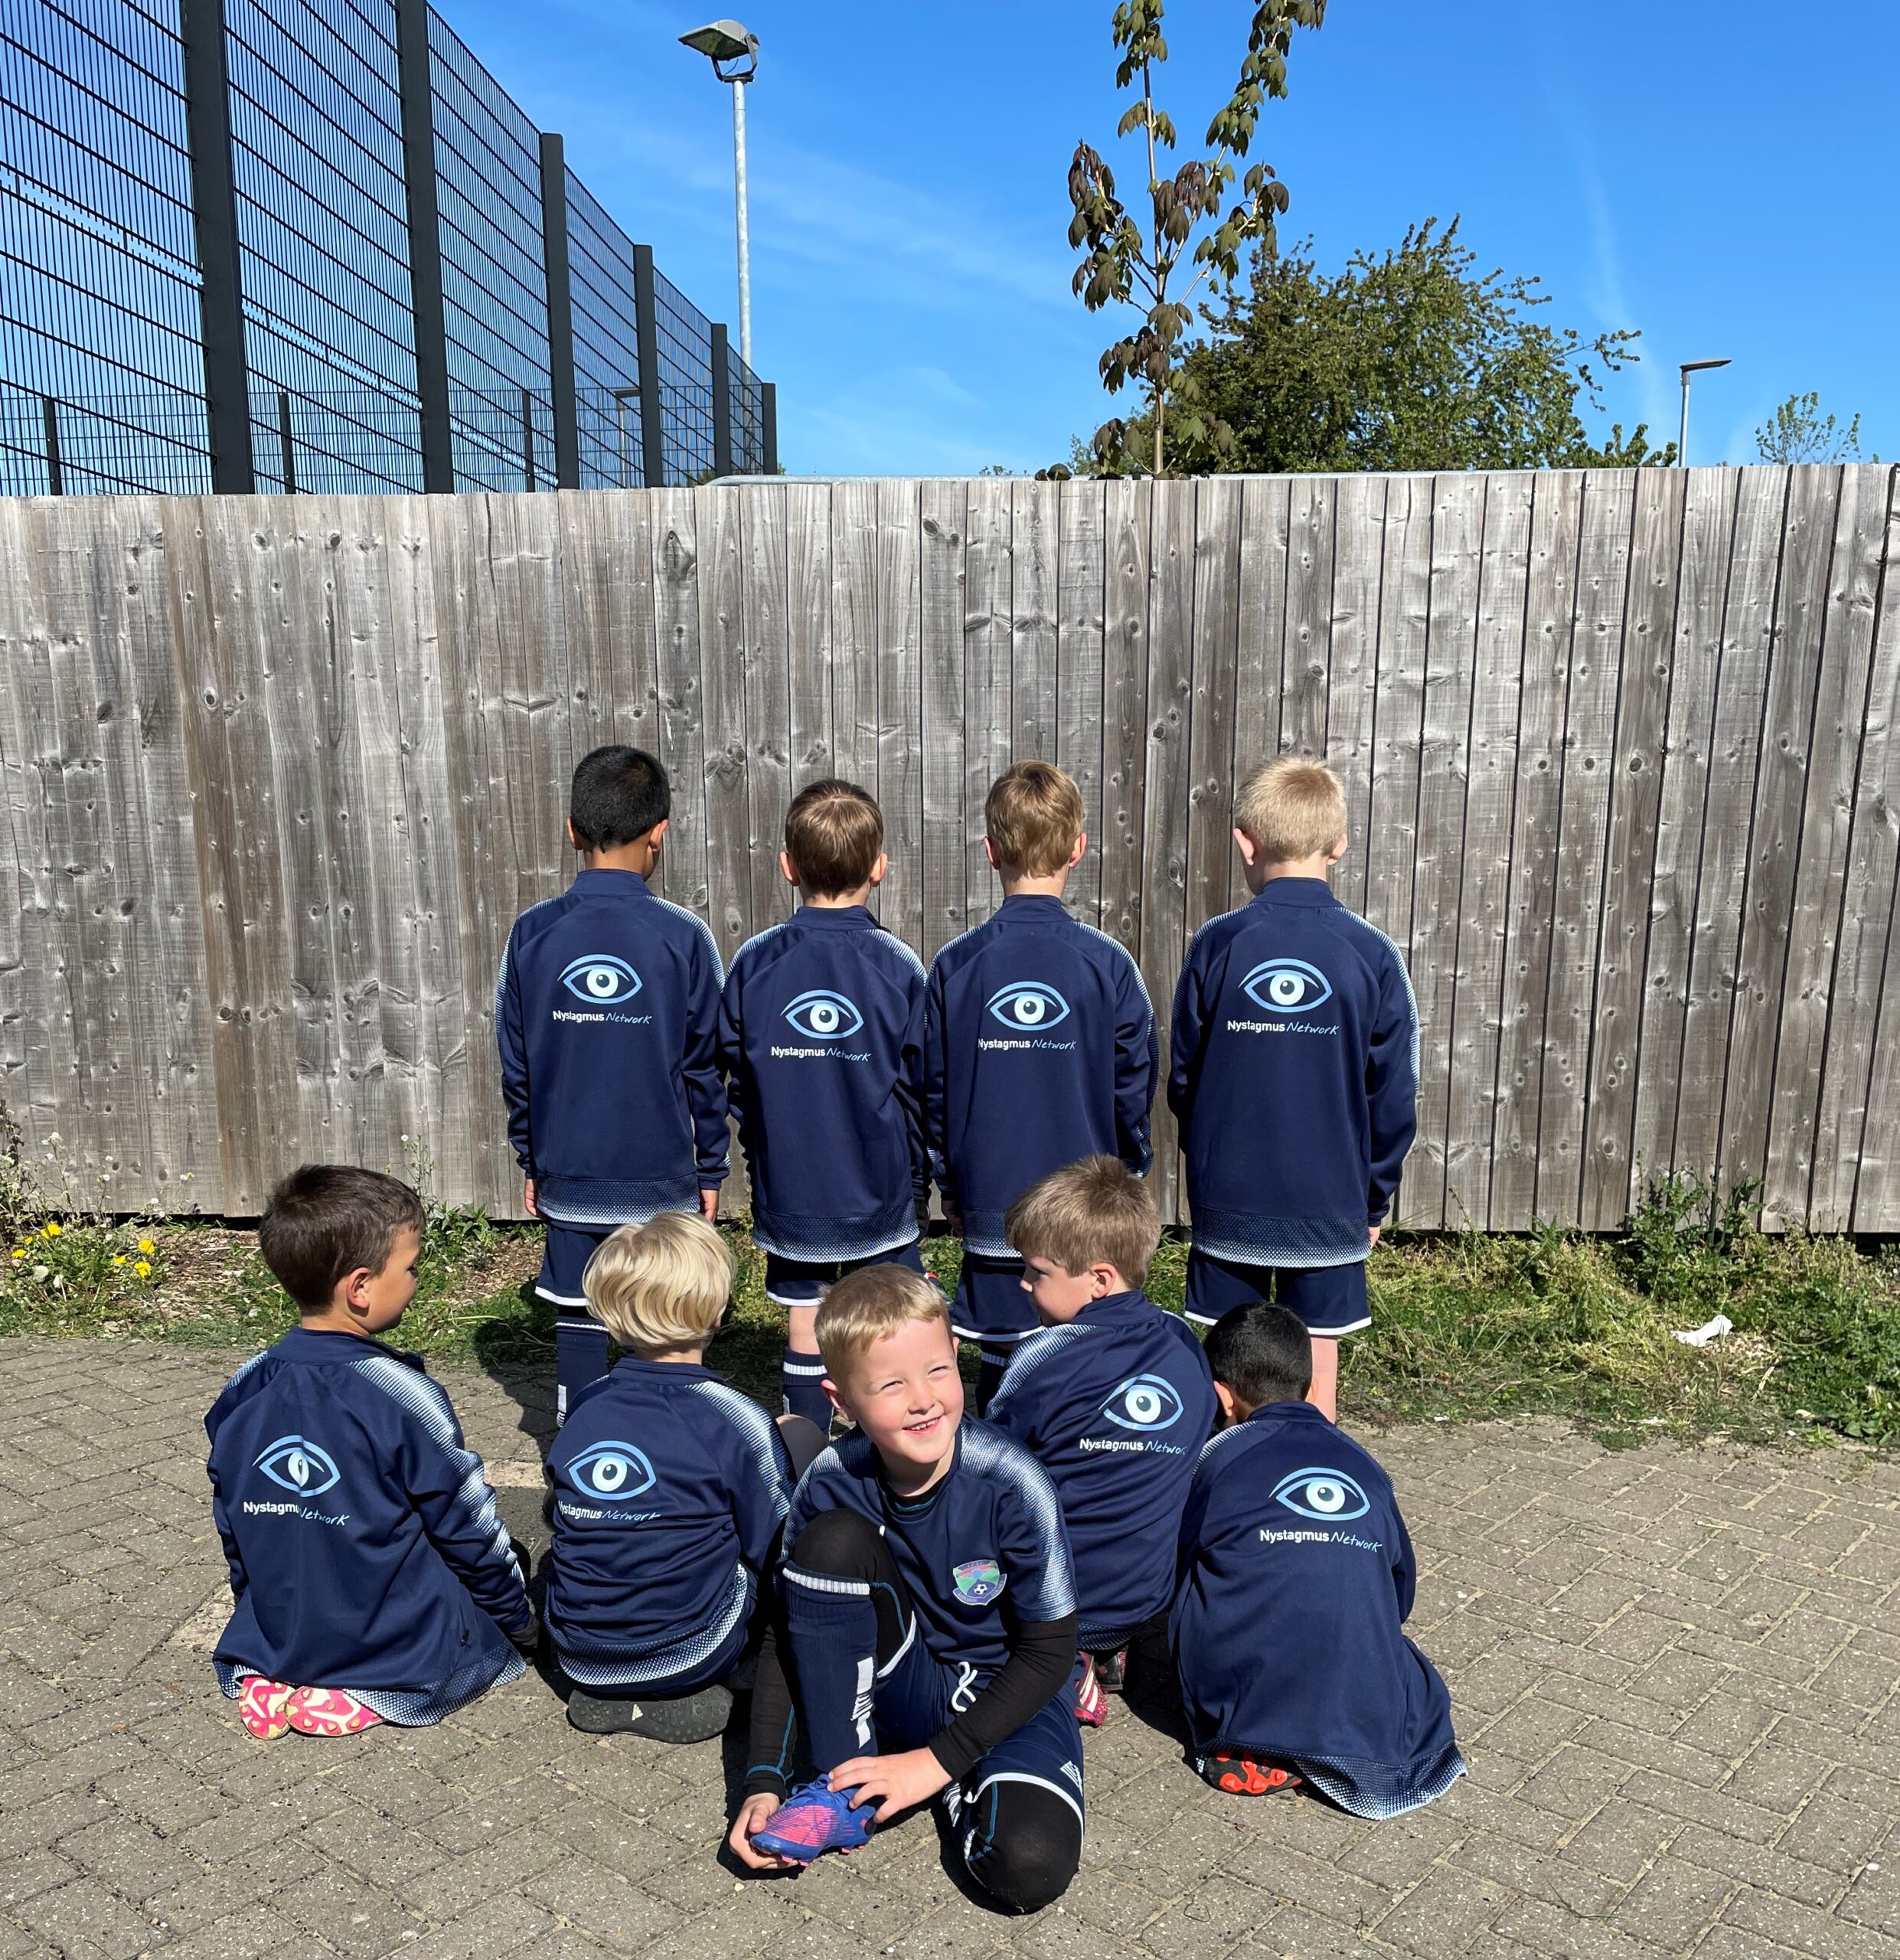 Charlie and his fellow team mmebers wearing their Nystagmus Network sports tops.